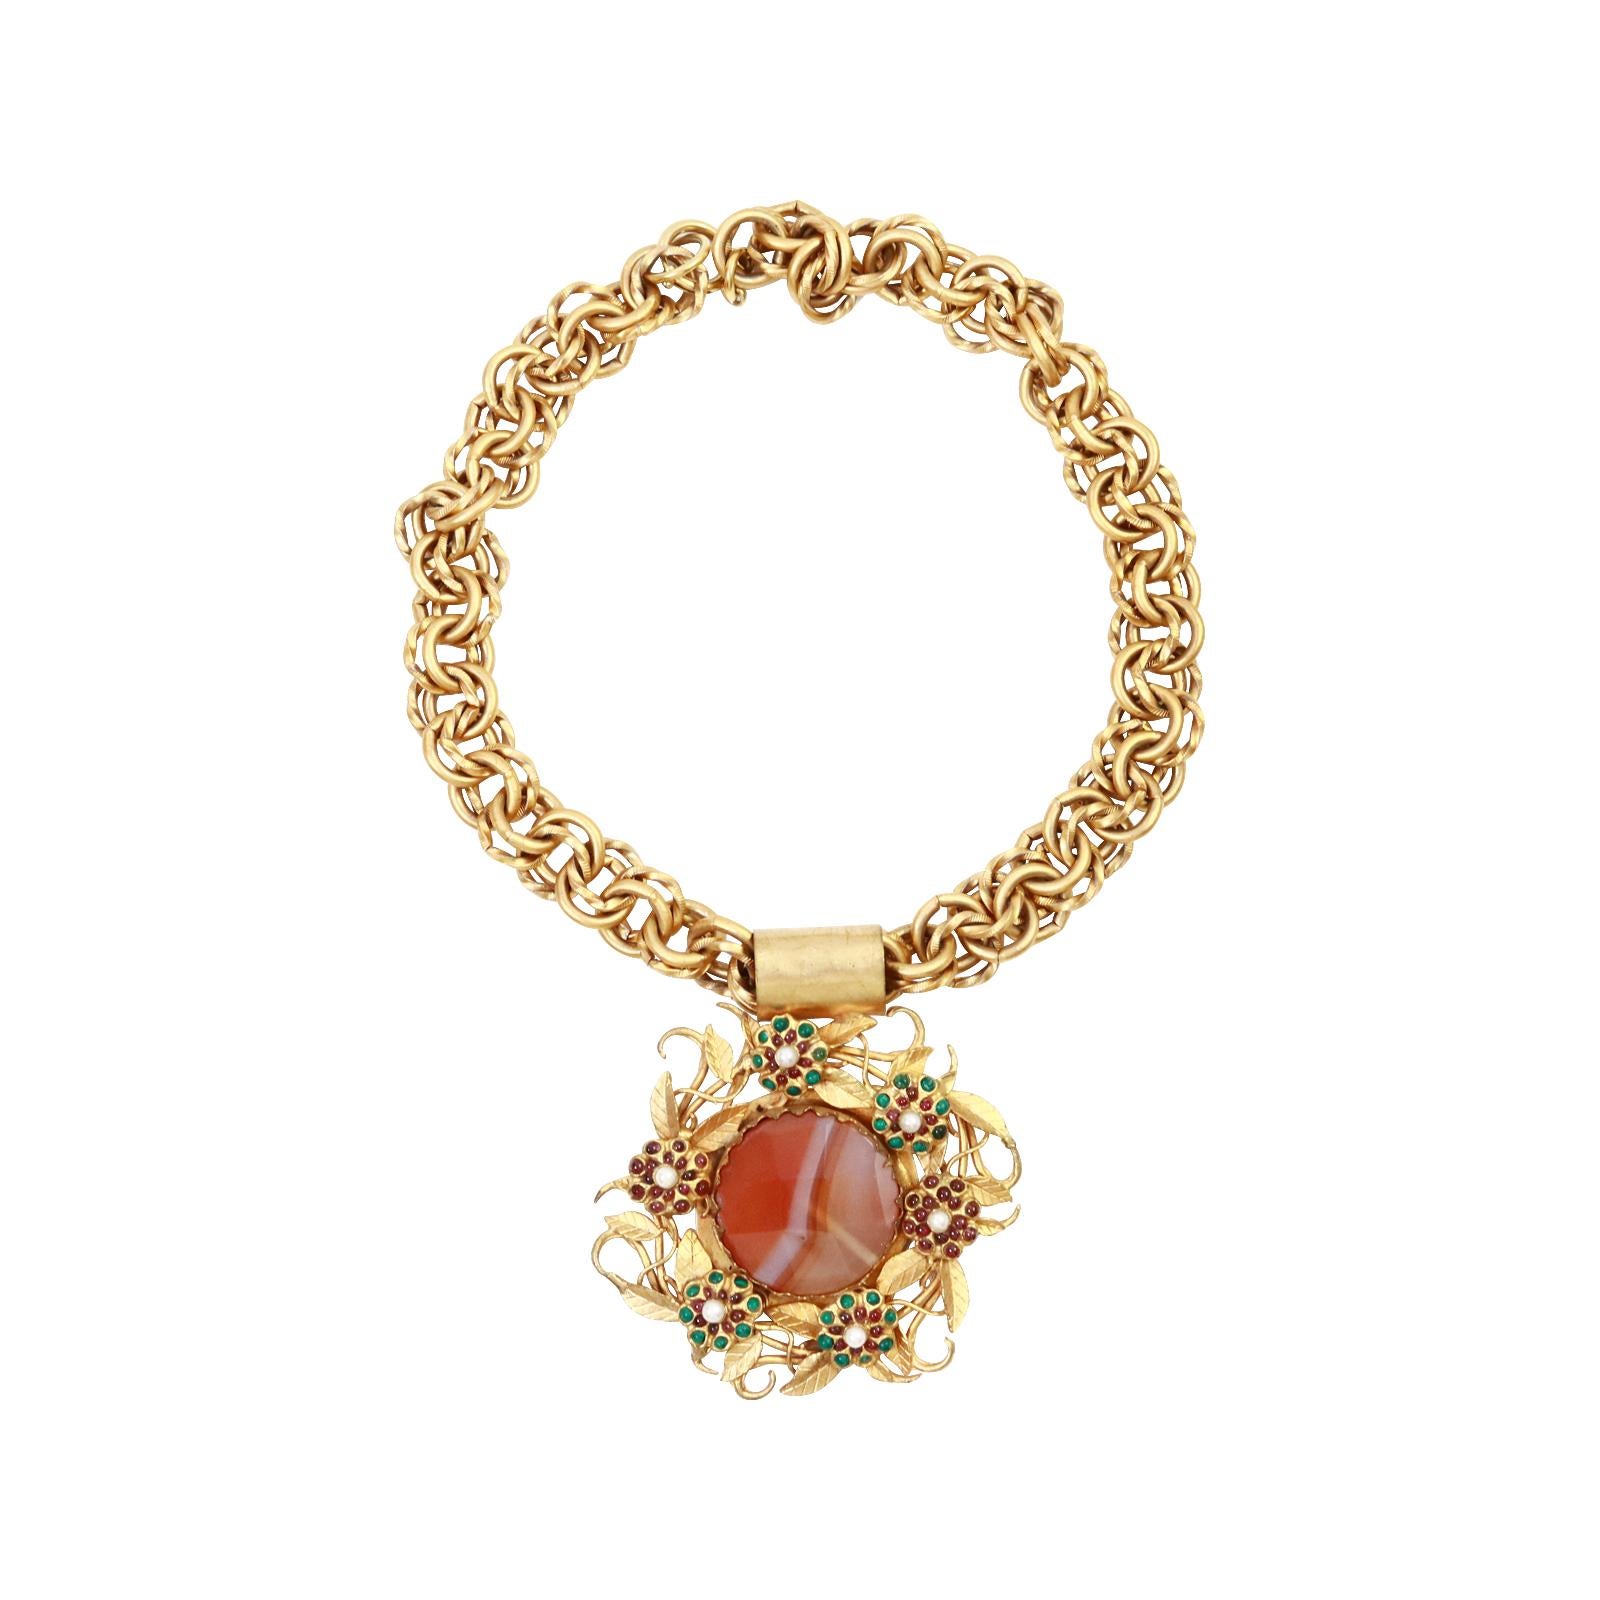 Vintage Rolled Gold With Cabochons Necklace Circa 1960's. Again, one of the most gorgeous necklaces that i have in the collection. When you study the work in this necklace that is about 60 years old, it is stunning. The small flowers sit on top of